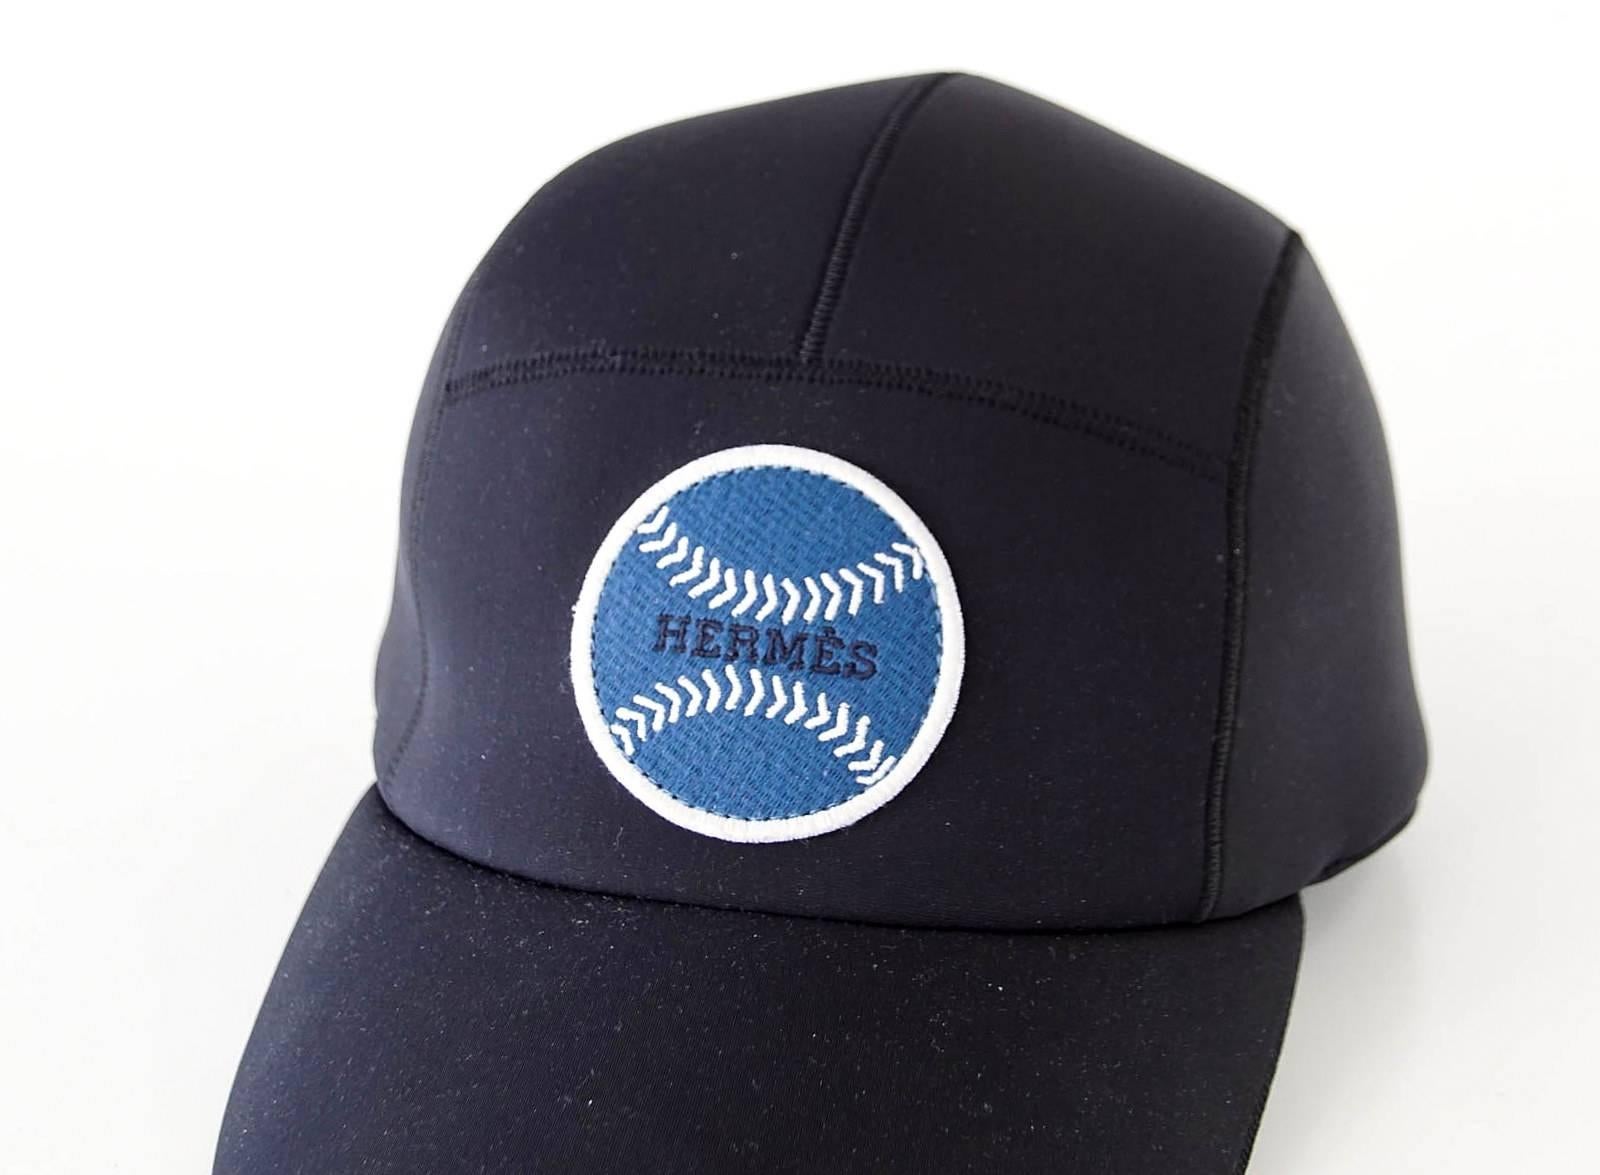 Guaranteed authentic Limited Edition Sold Out black Baseball cap.
Blue Baseball with white stitching and HERMES written in black across the center.
2 HERMES PARIS Clou de Selle snaps at rear.
Polyamide and elastane create a water resistant cap that